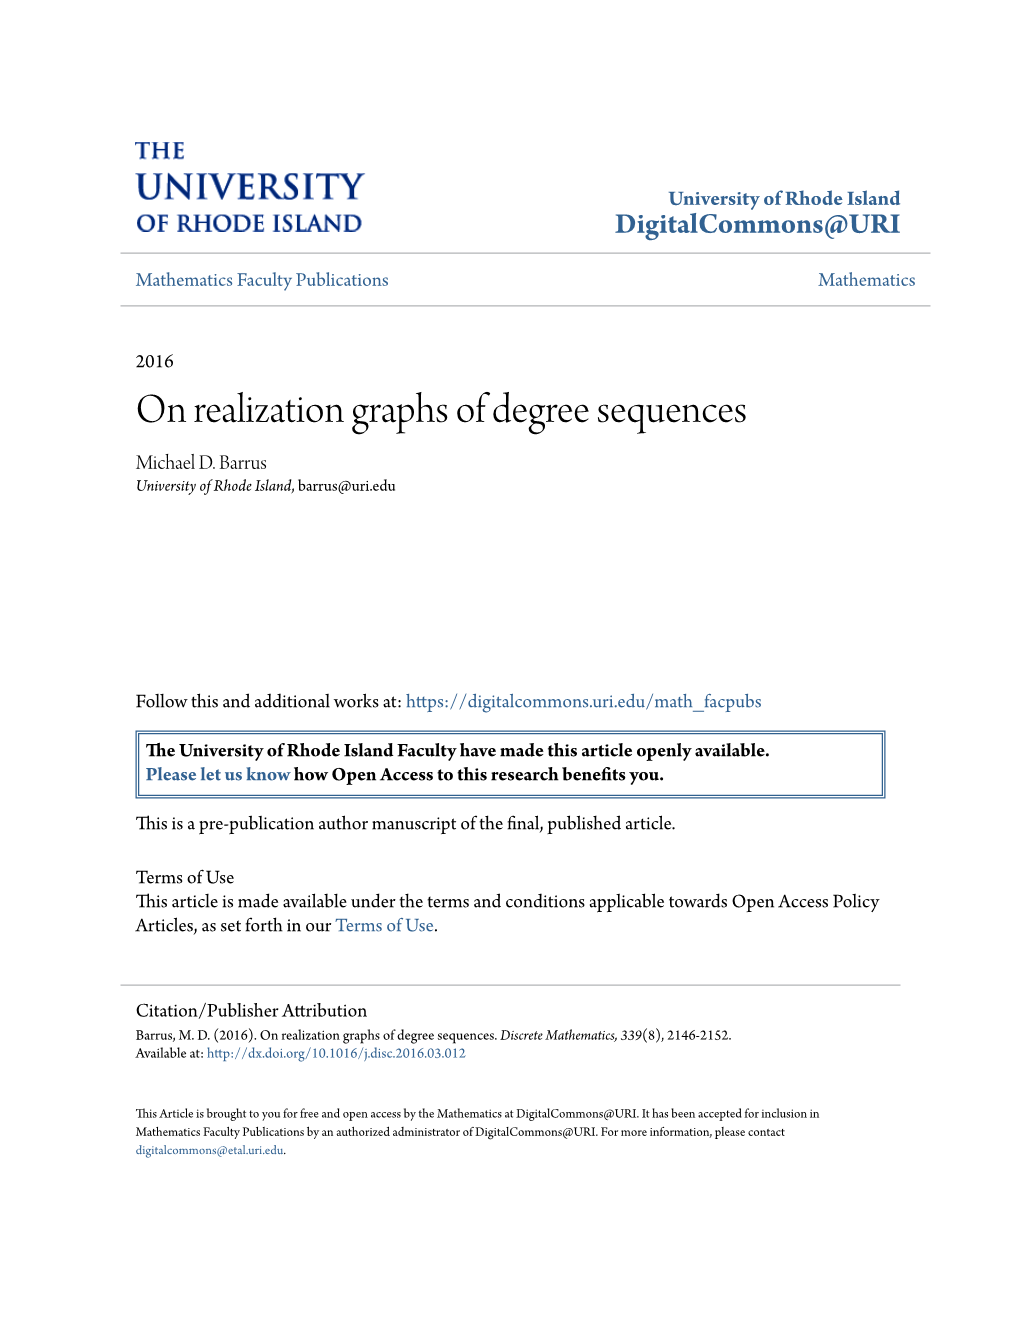 On Realization Graphs of Degree Sequences Michael D